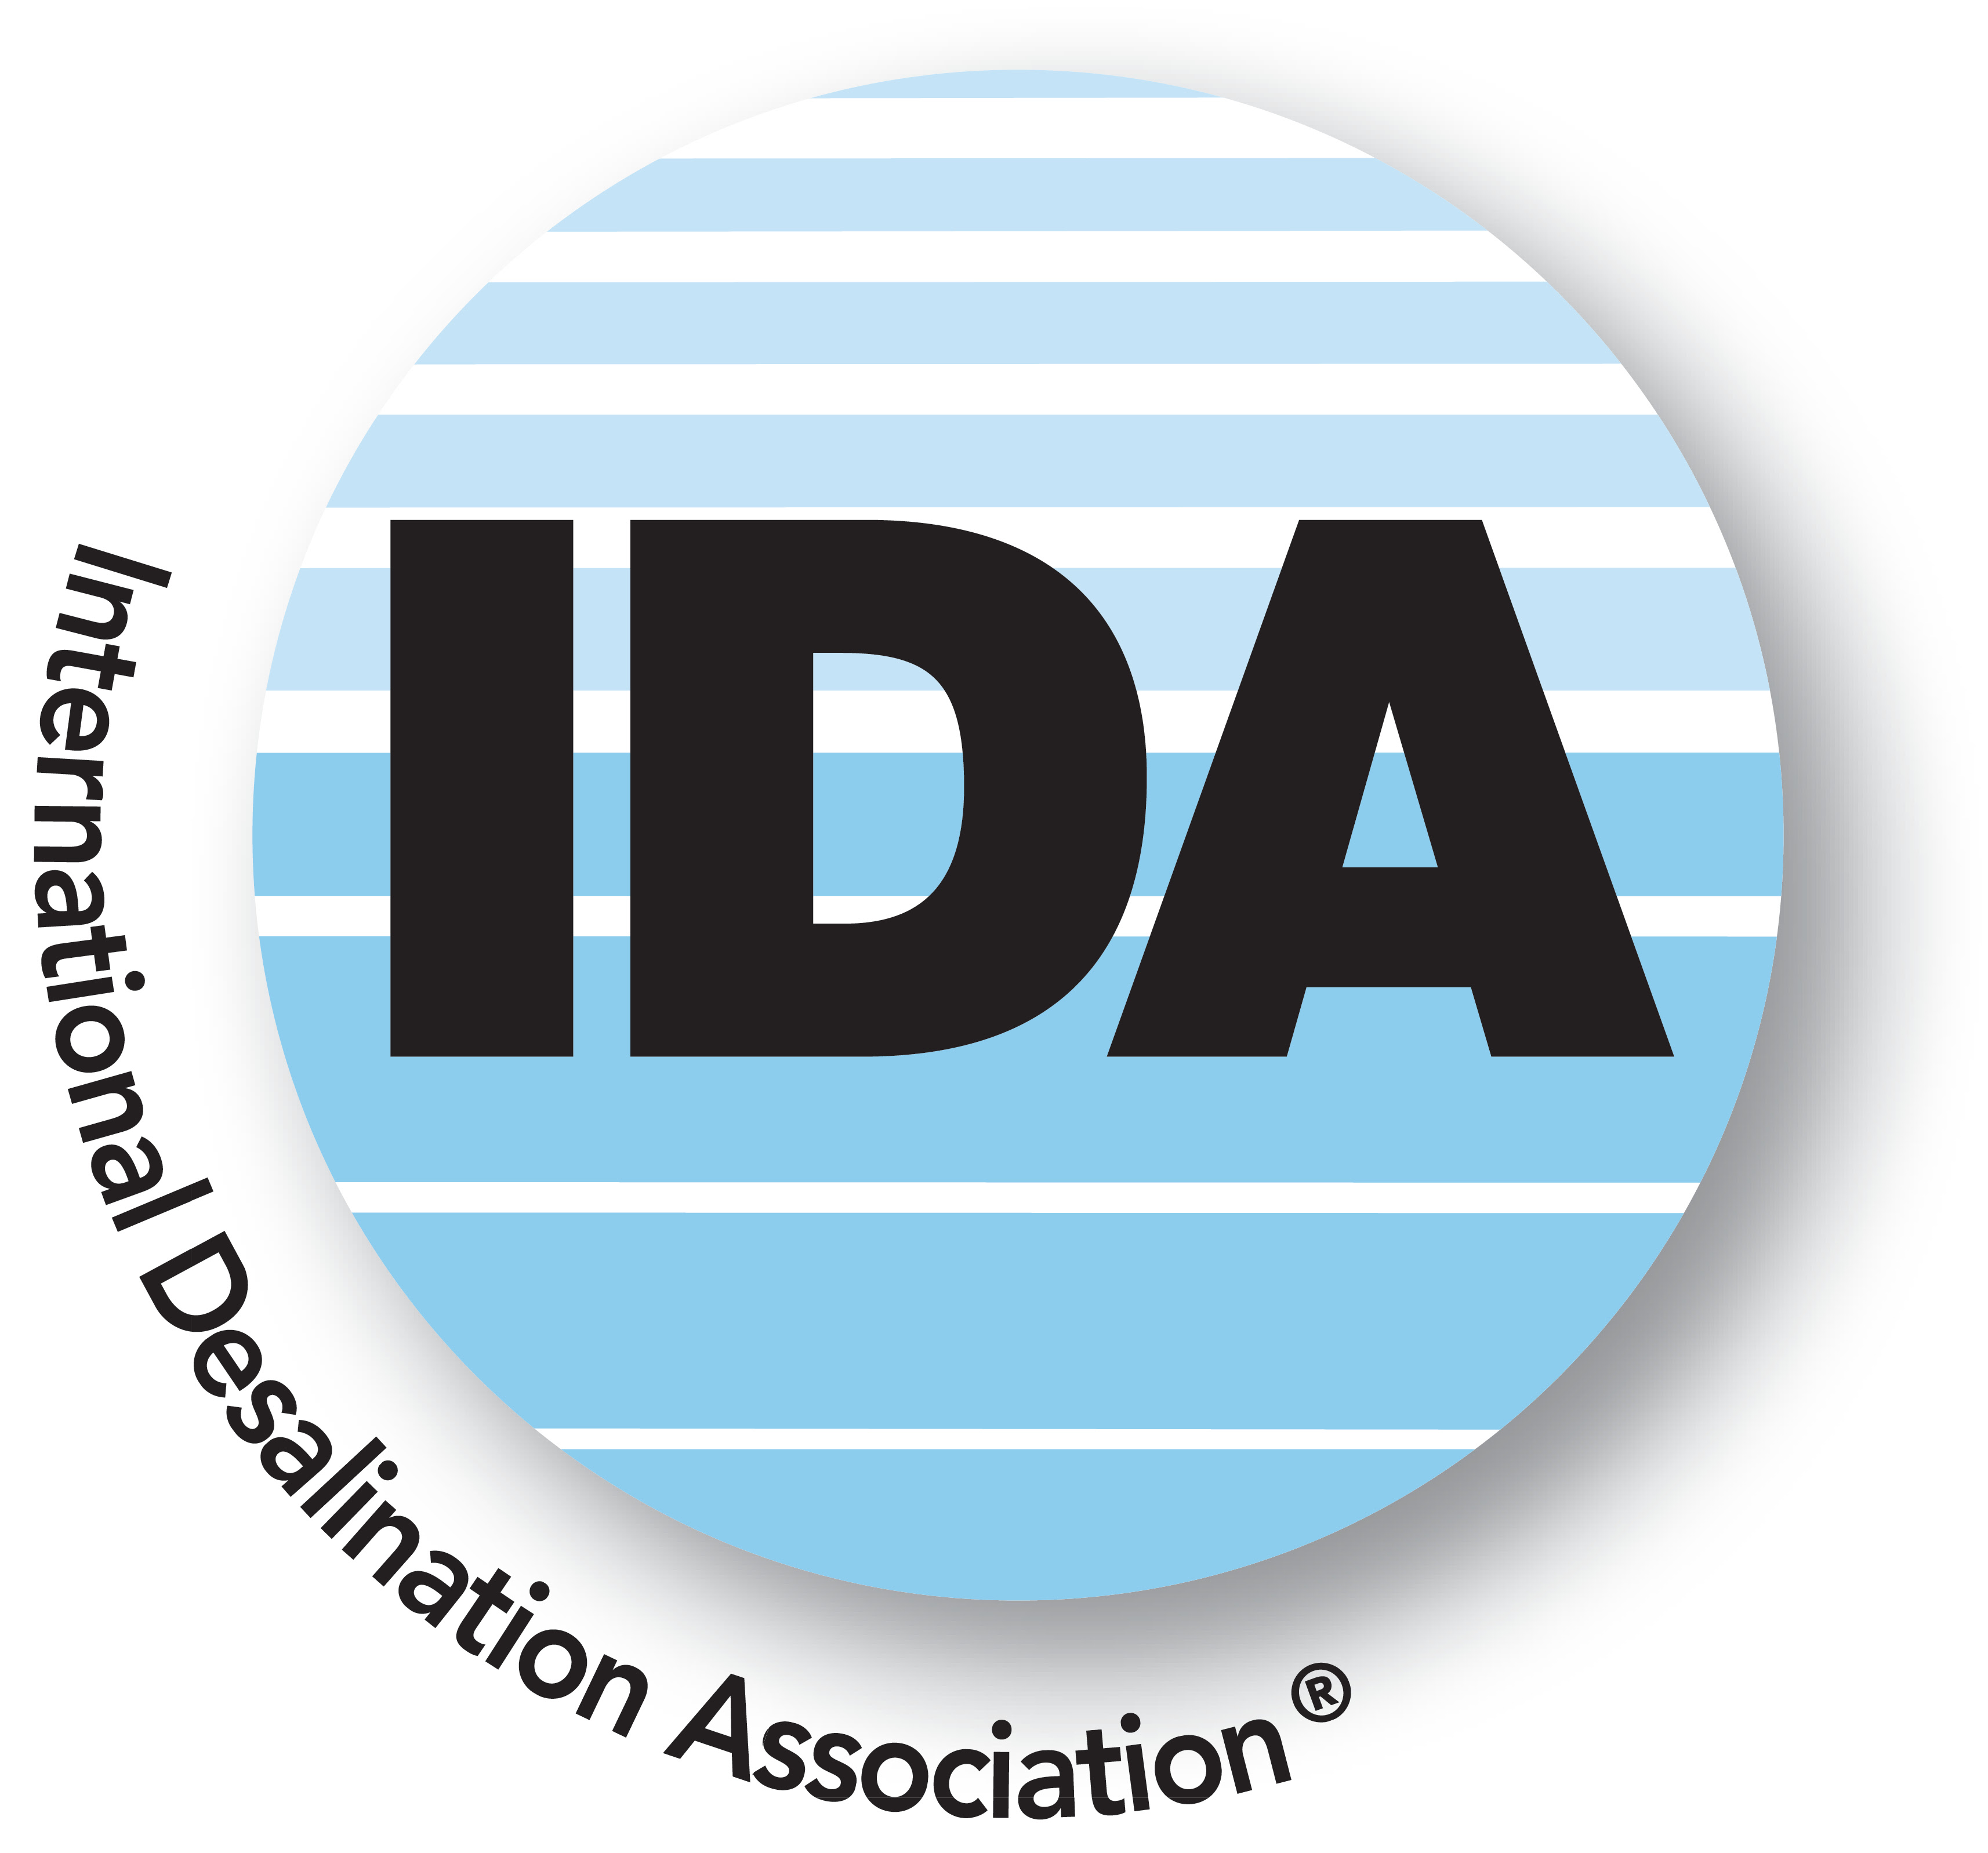 Dr Corrado Sommariva, will be the instructor at a workshop covering sustainability and water management at the IDA Congress.